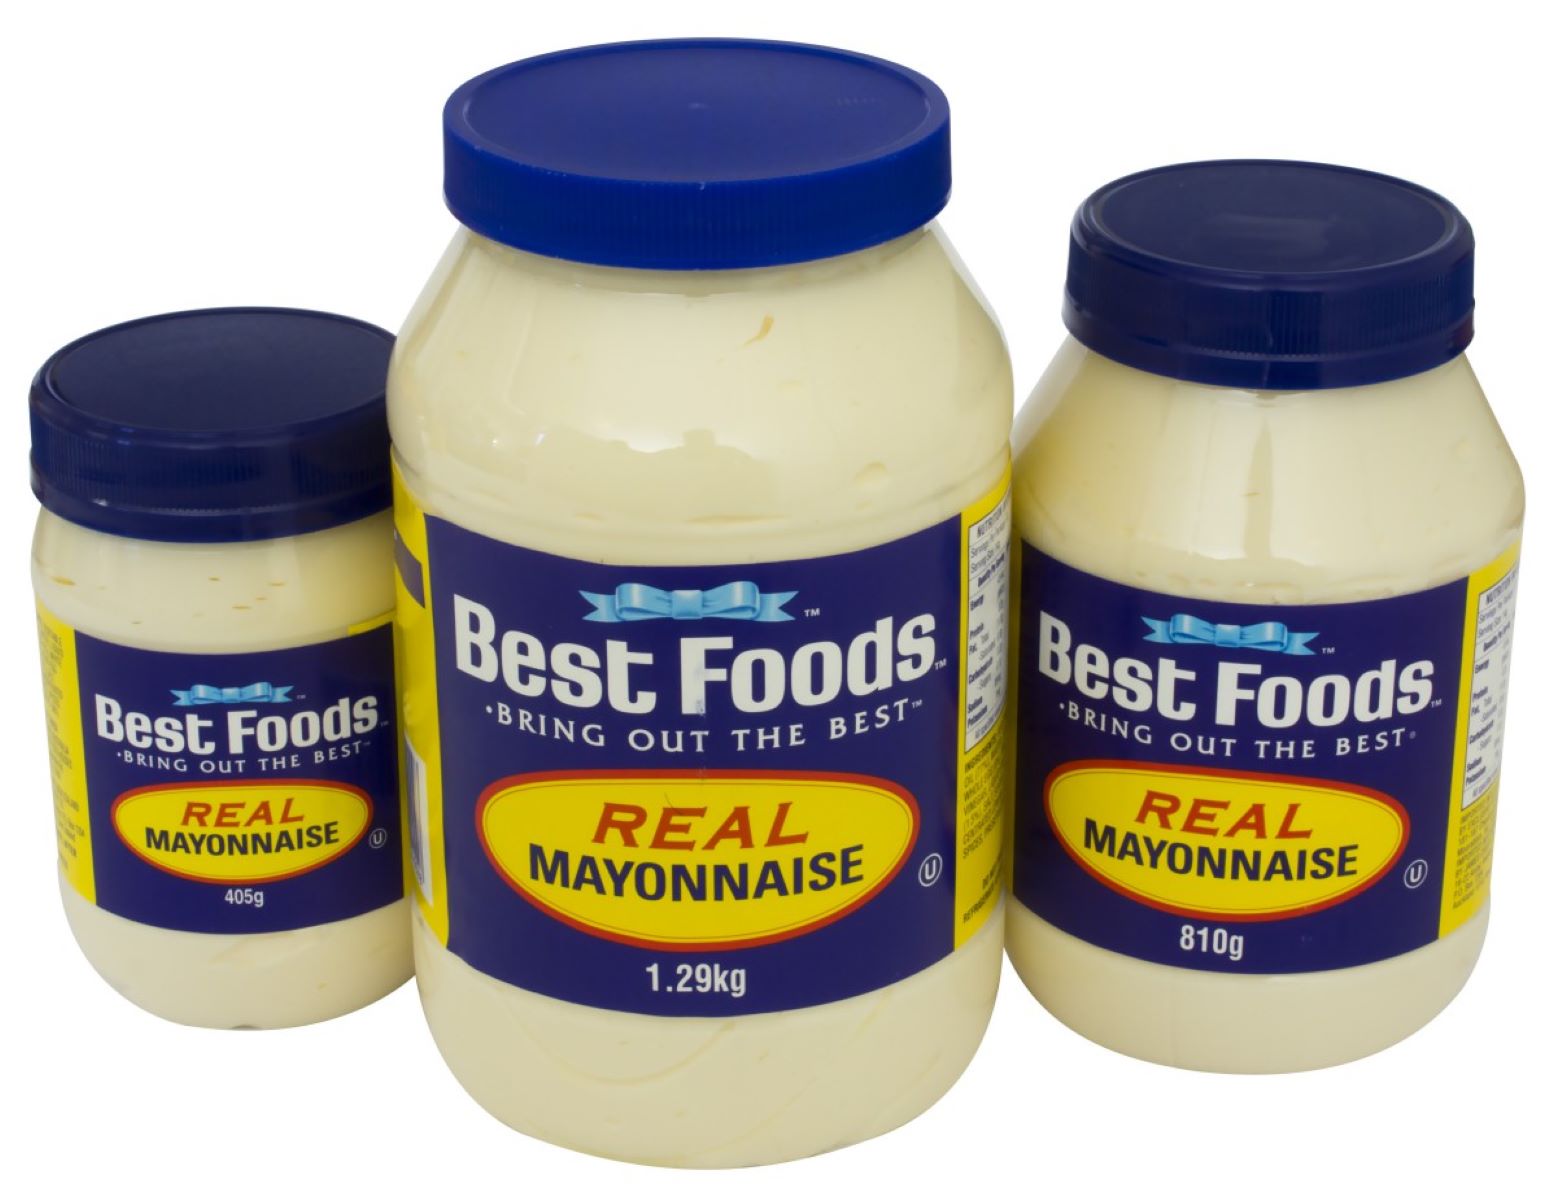 15-best-foods-mayo-nutrition-facts